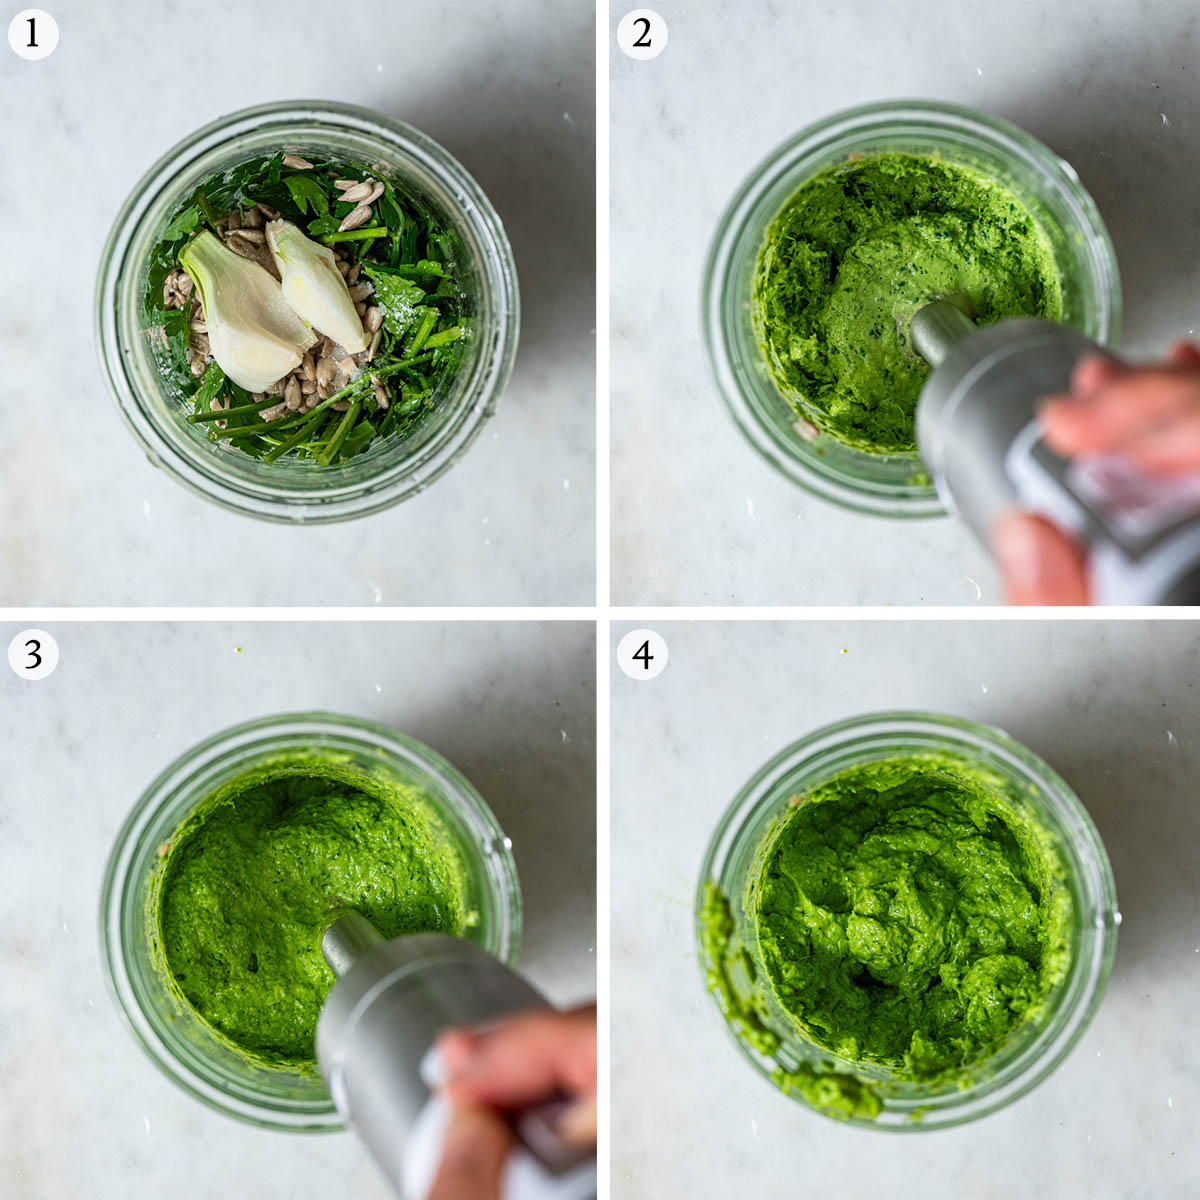 Parsley pesto steps 1 to 4, blending ingredients and adding olive oil to mix.